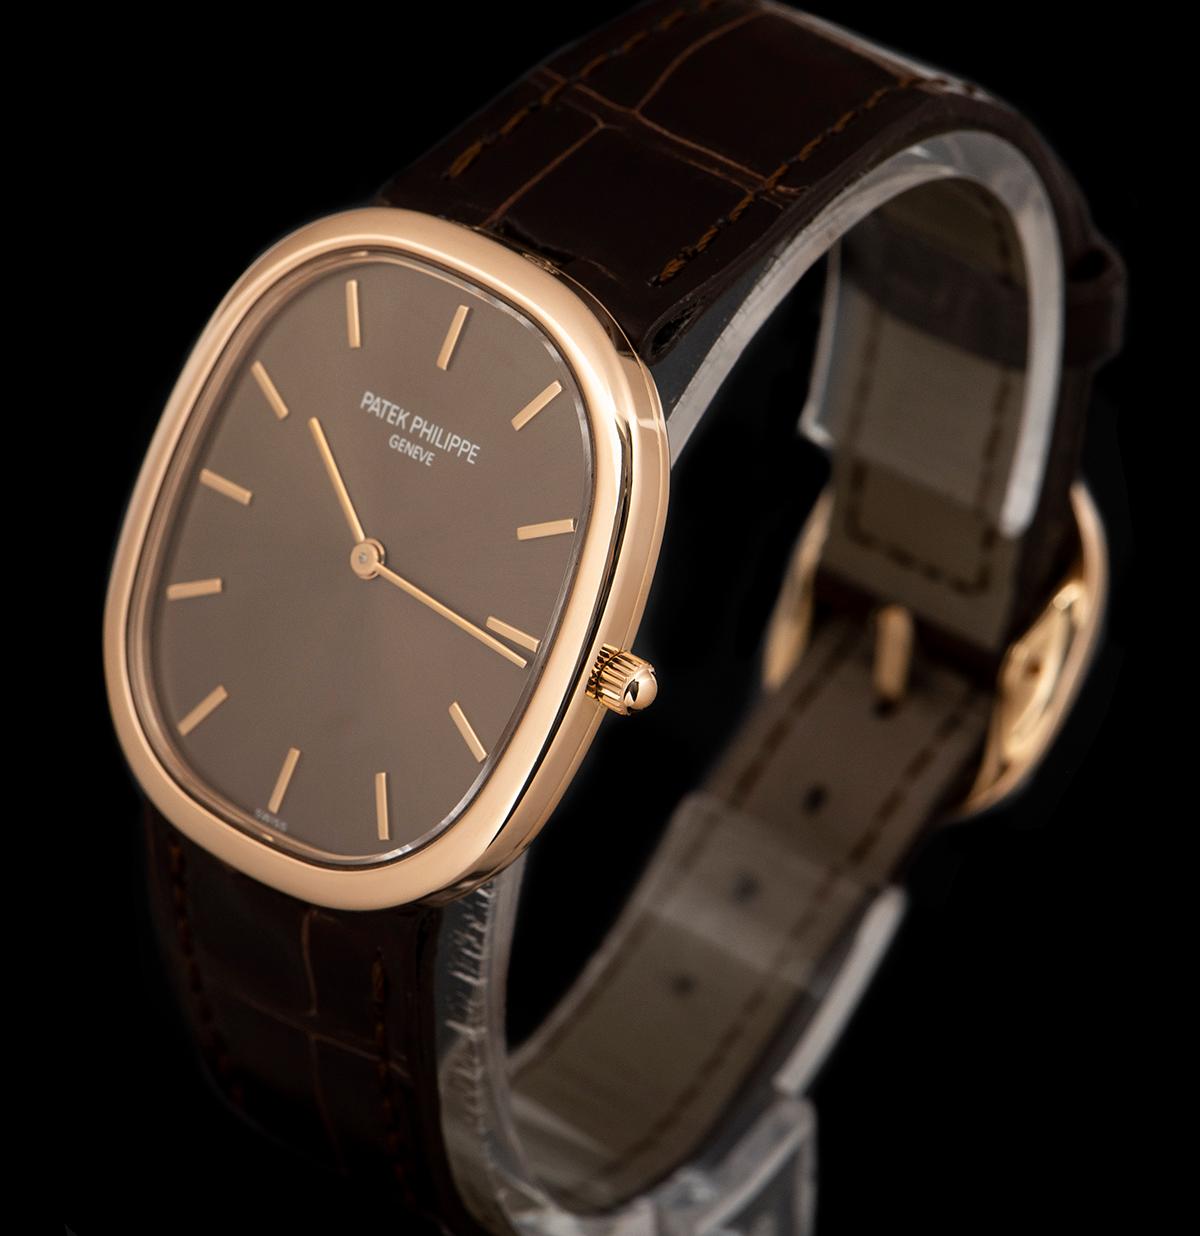 An 18k Rose Gold Golden Ellipse Gents Wristwatch, brown dial with applied hour markers, a fixed 18k rose gold bezel, an original brown leather strap with an original 18k rose gold pin buckle, sapphire glass, automatic movement, in excellent